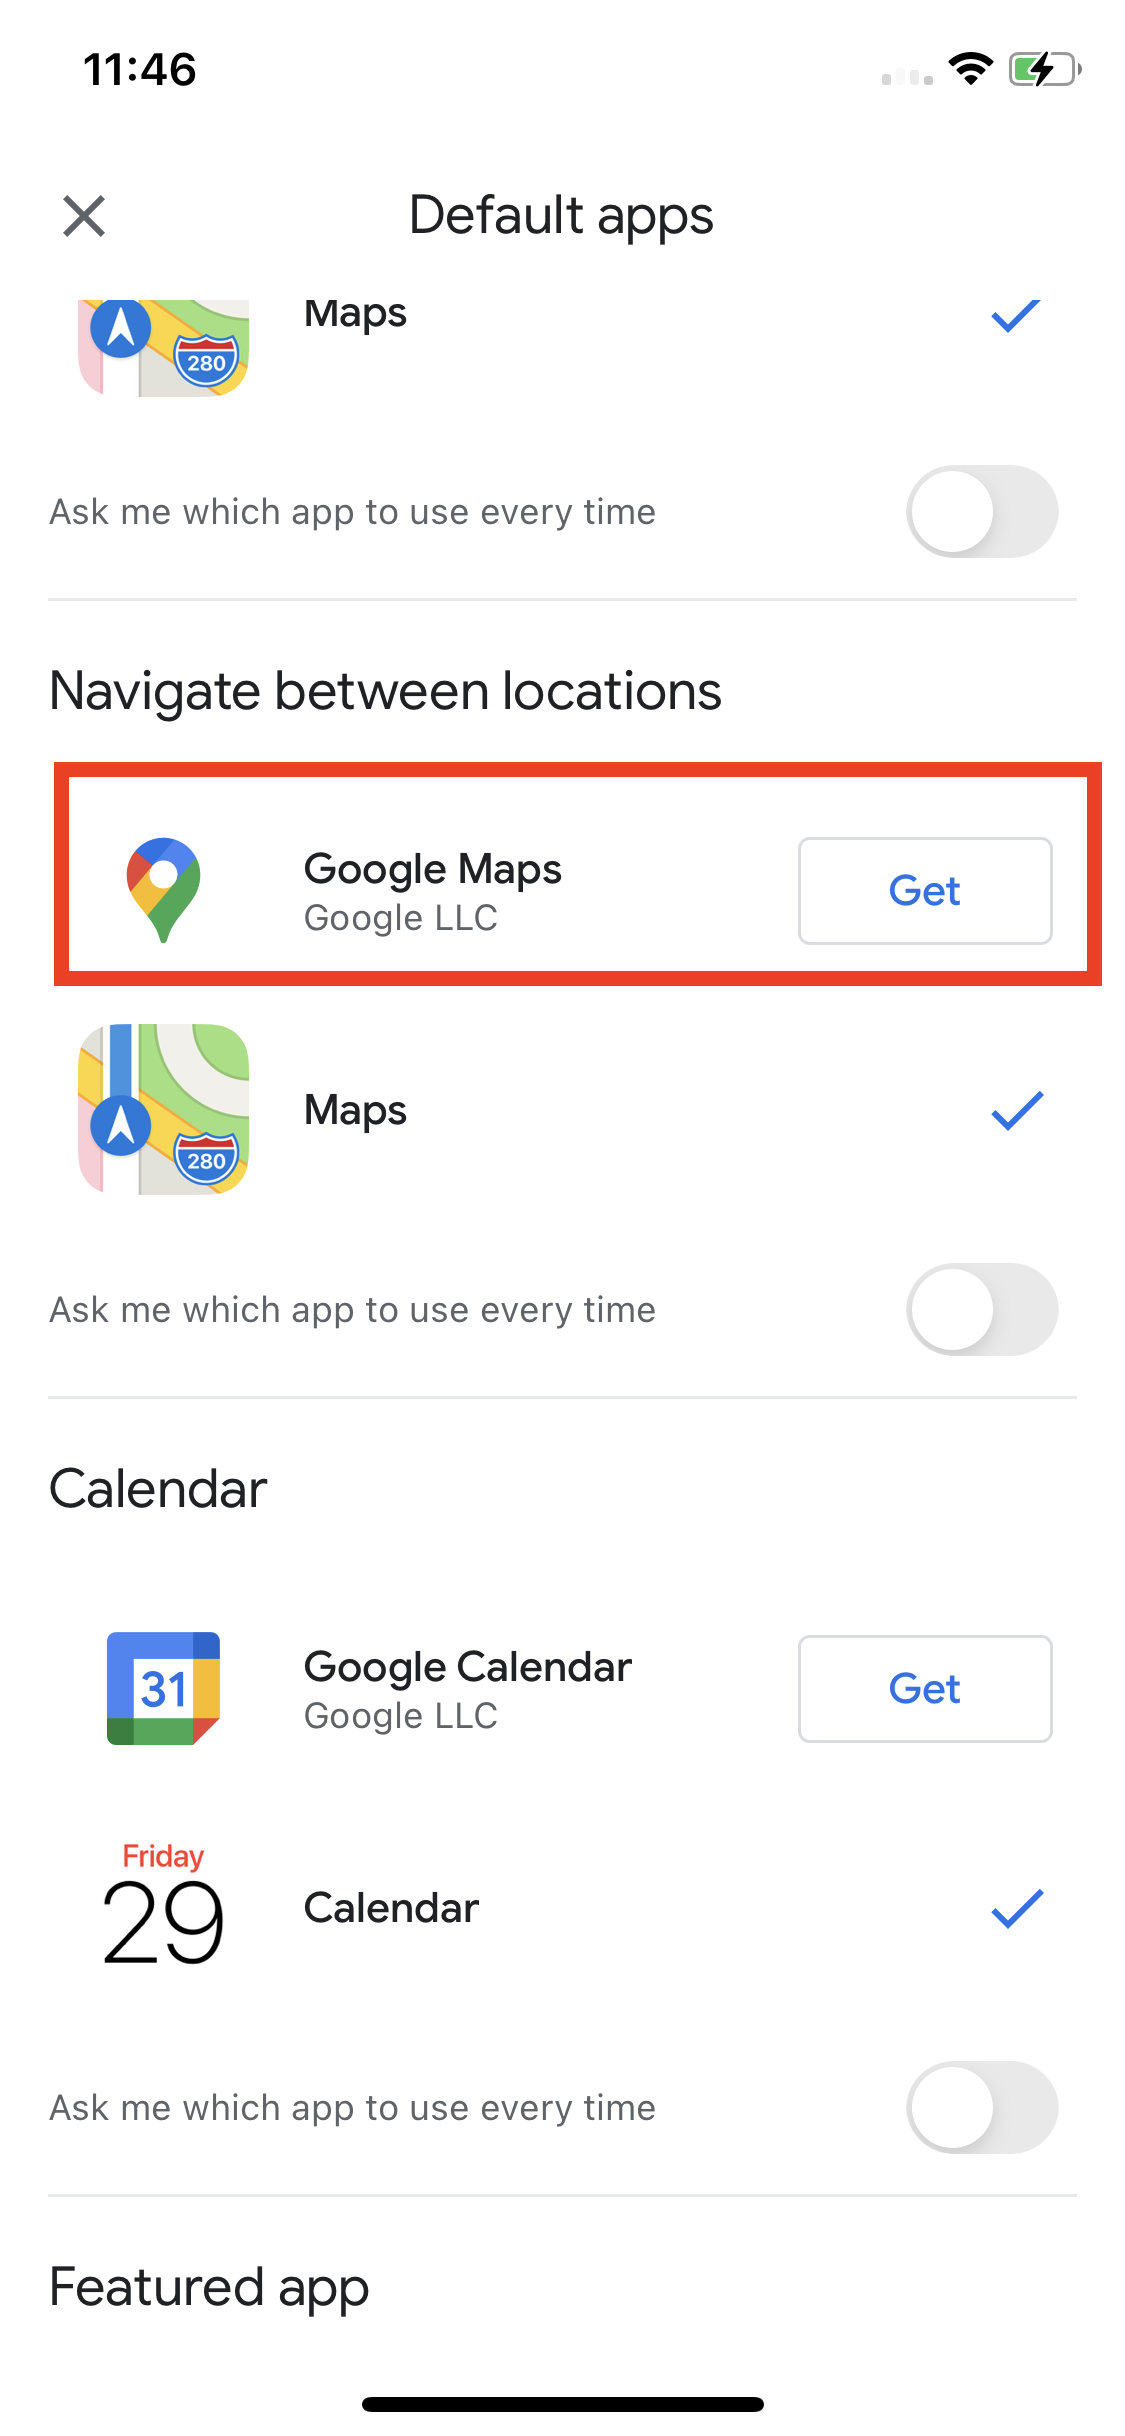 Under Navigate between locations, tap on ‘Google Maps’